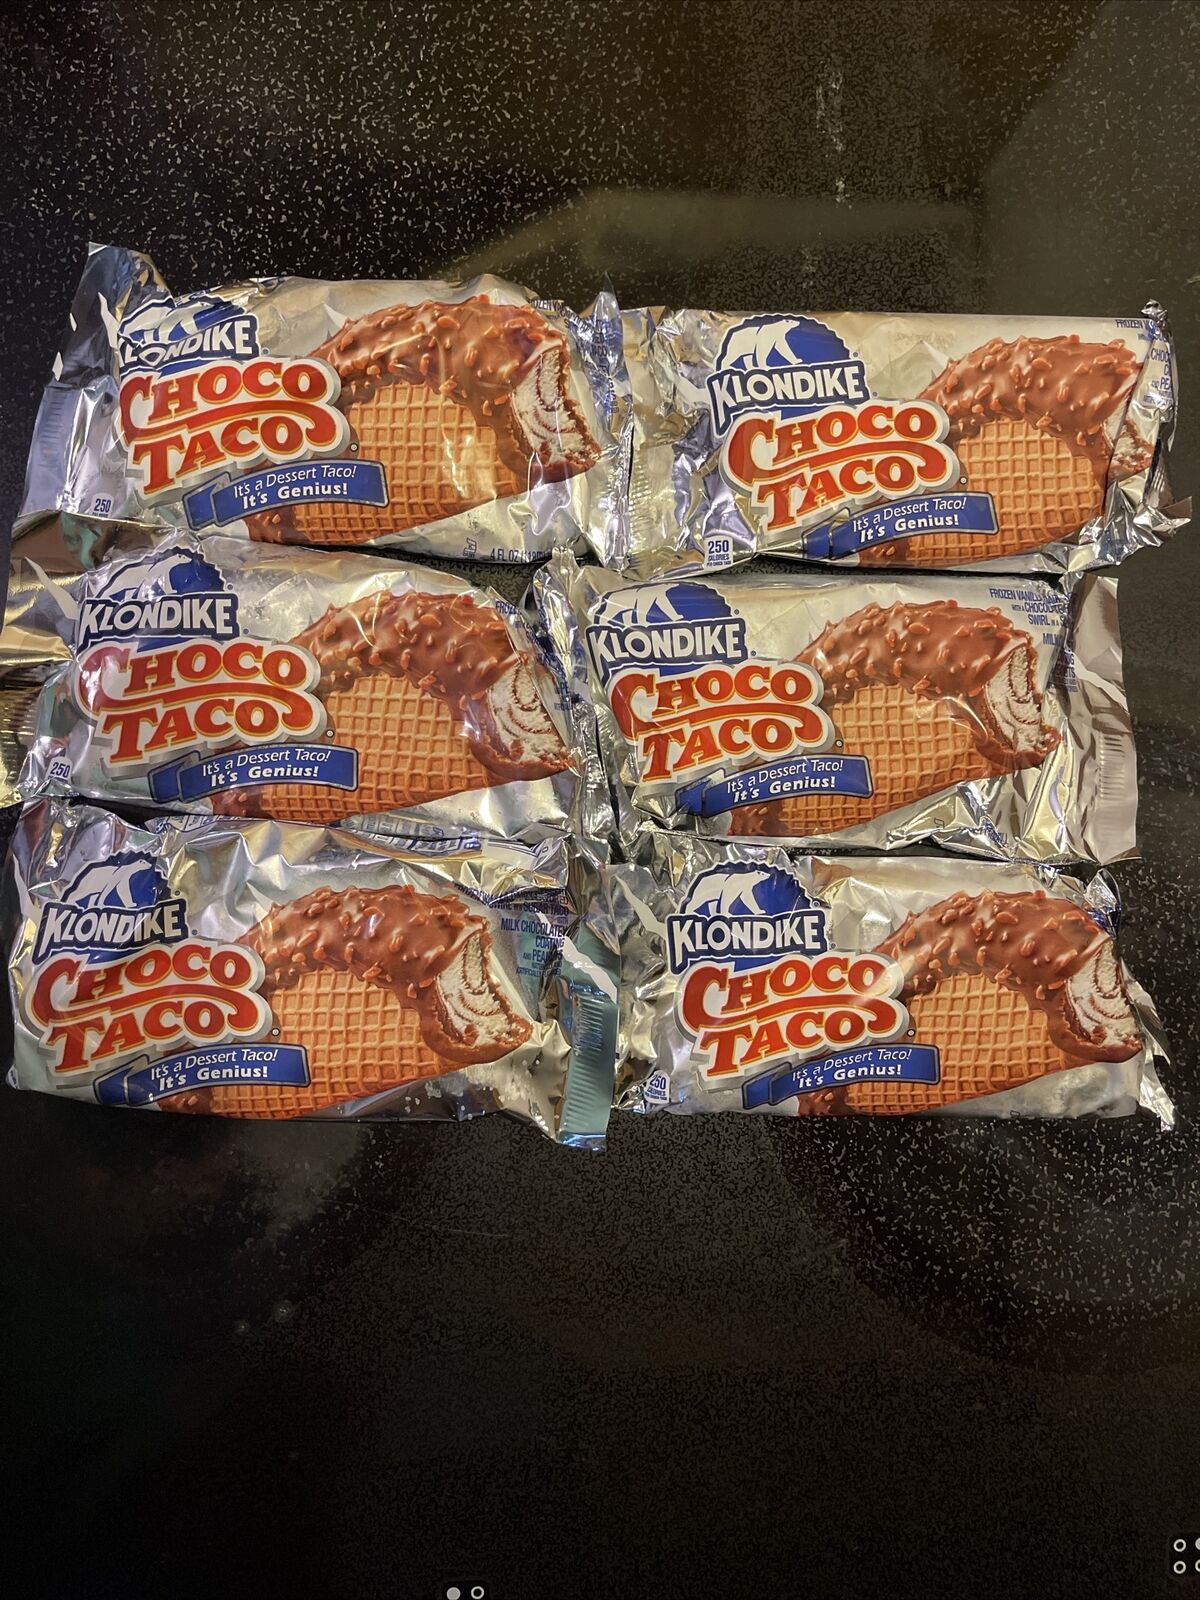 1 Klondike Choco Taco 4oz Ice Cream Pickup St. Charles, IL. Only 6 Available